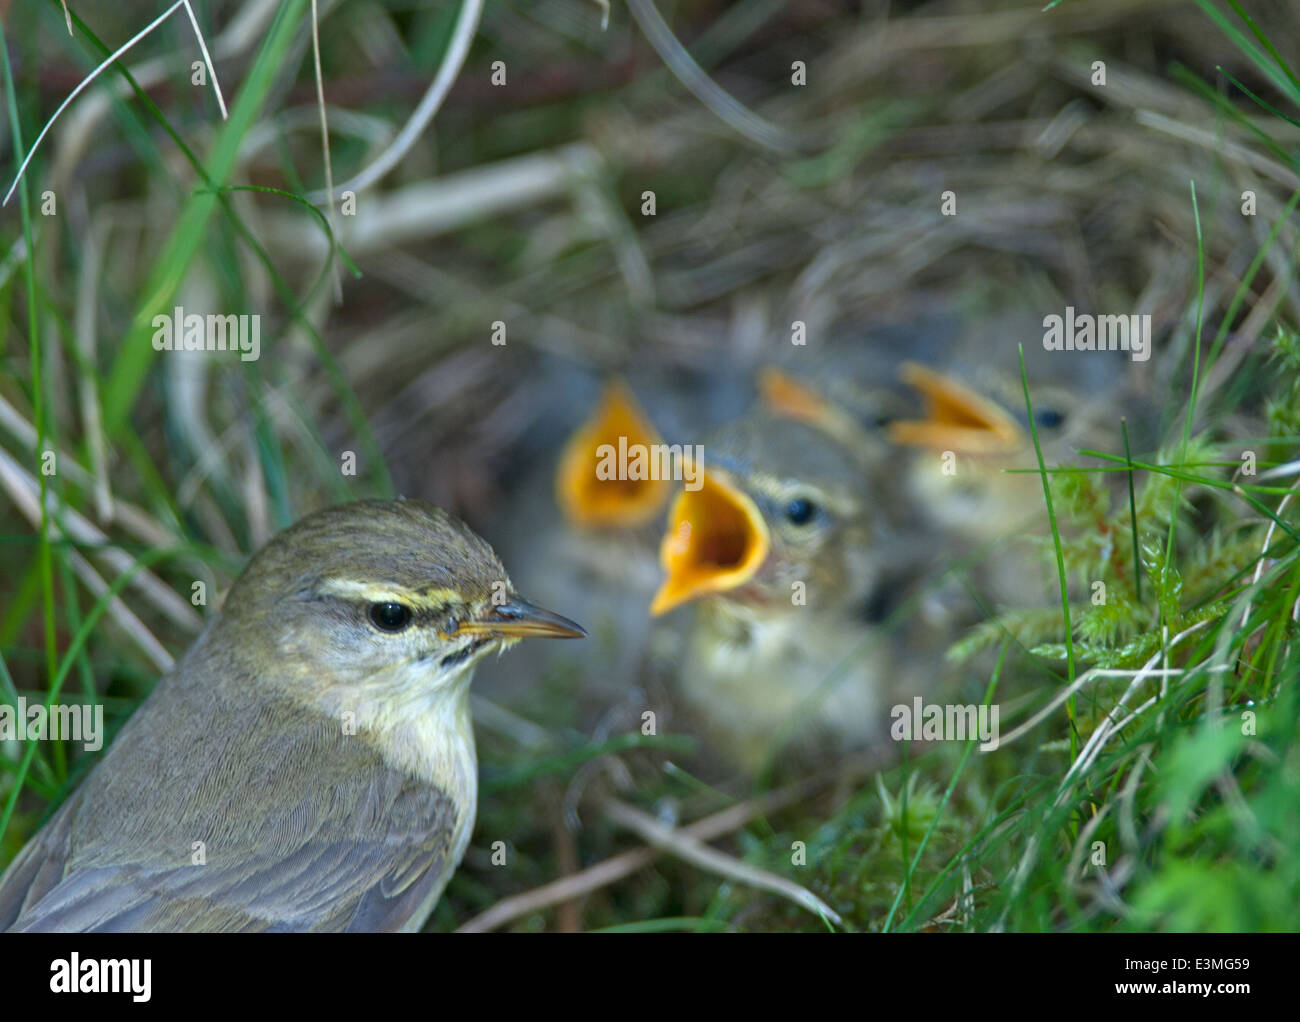 Willow warbler (Phylloscopus trochilus) parent feeding a nest full of chicks. SCO 9094. Stock Photo